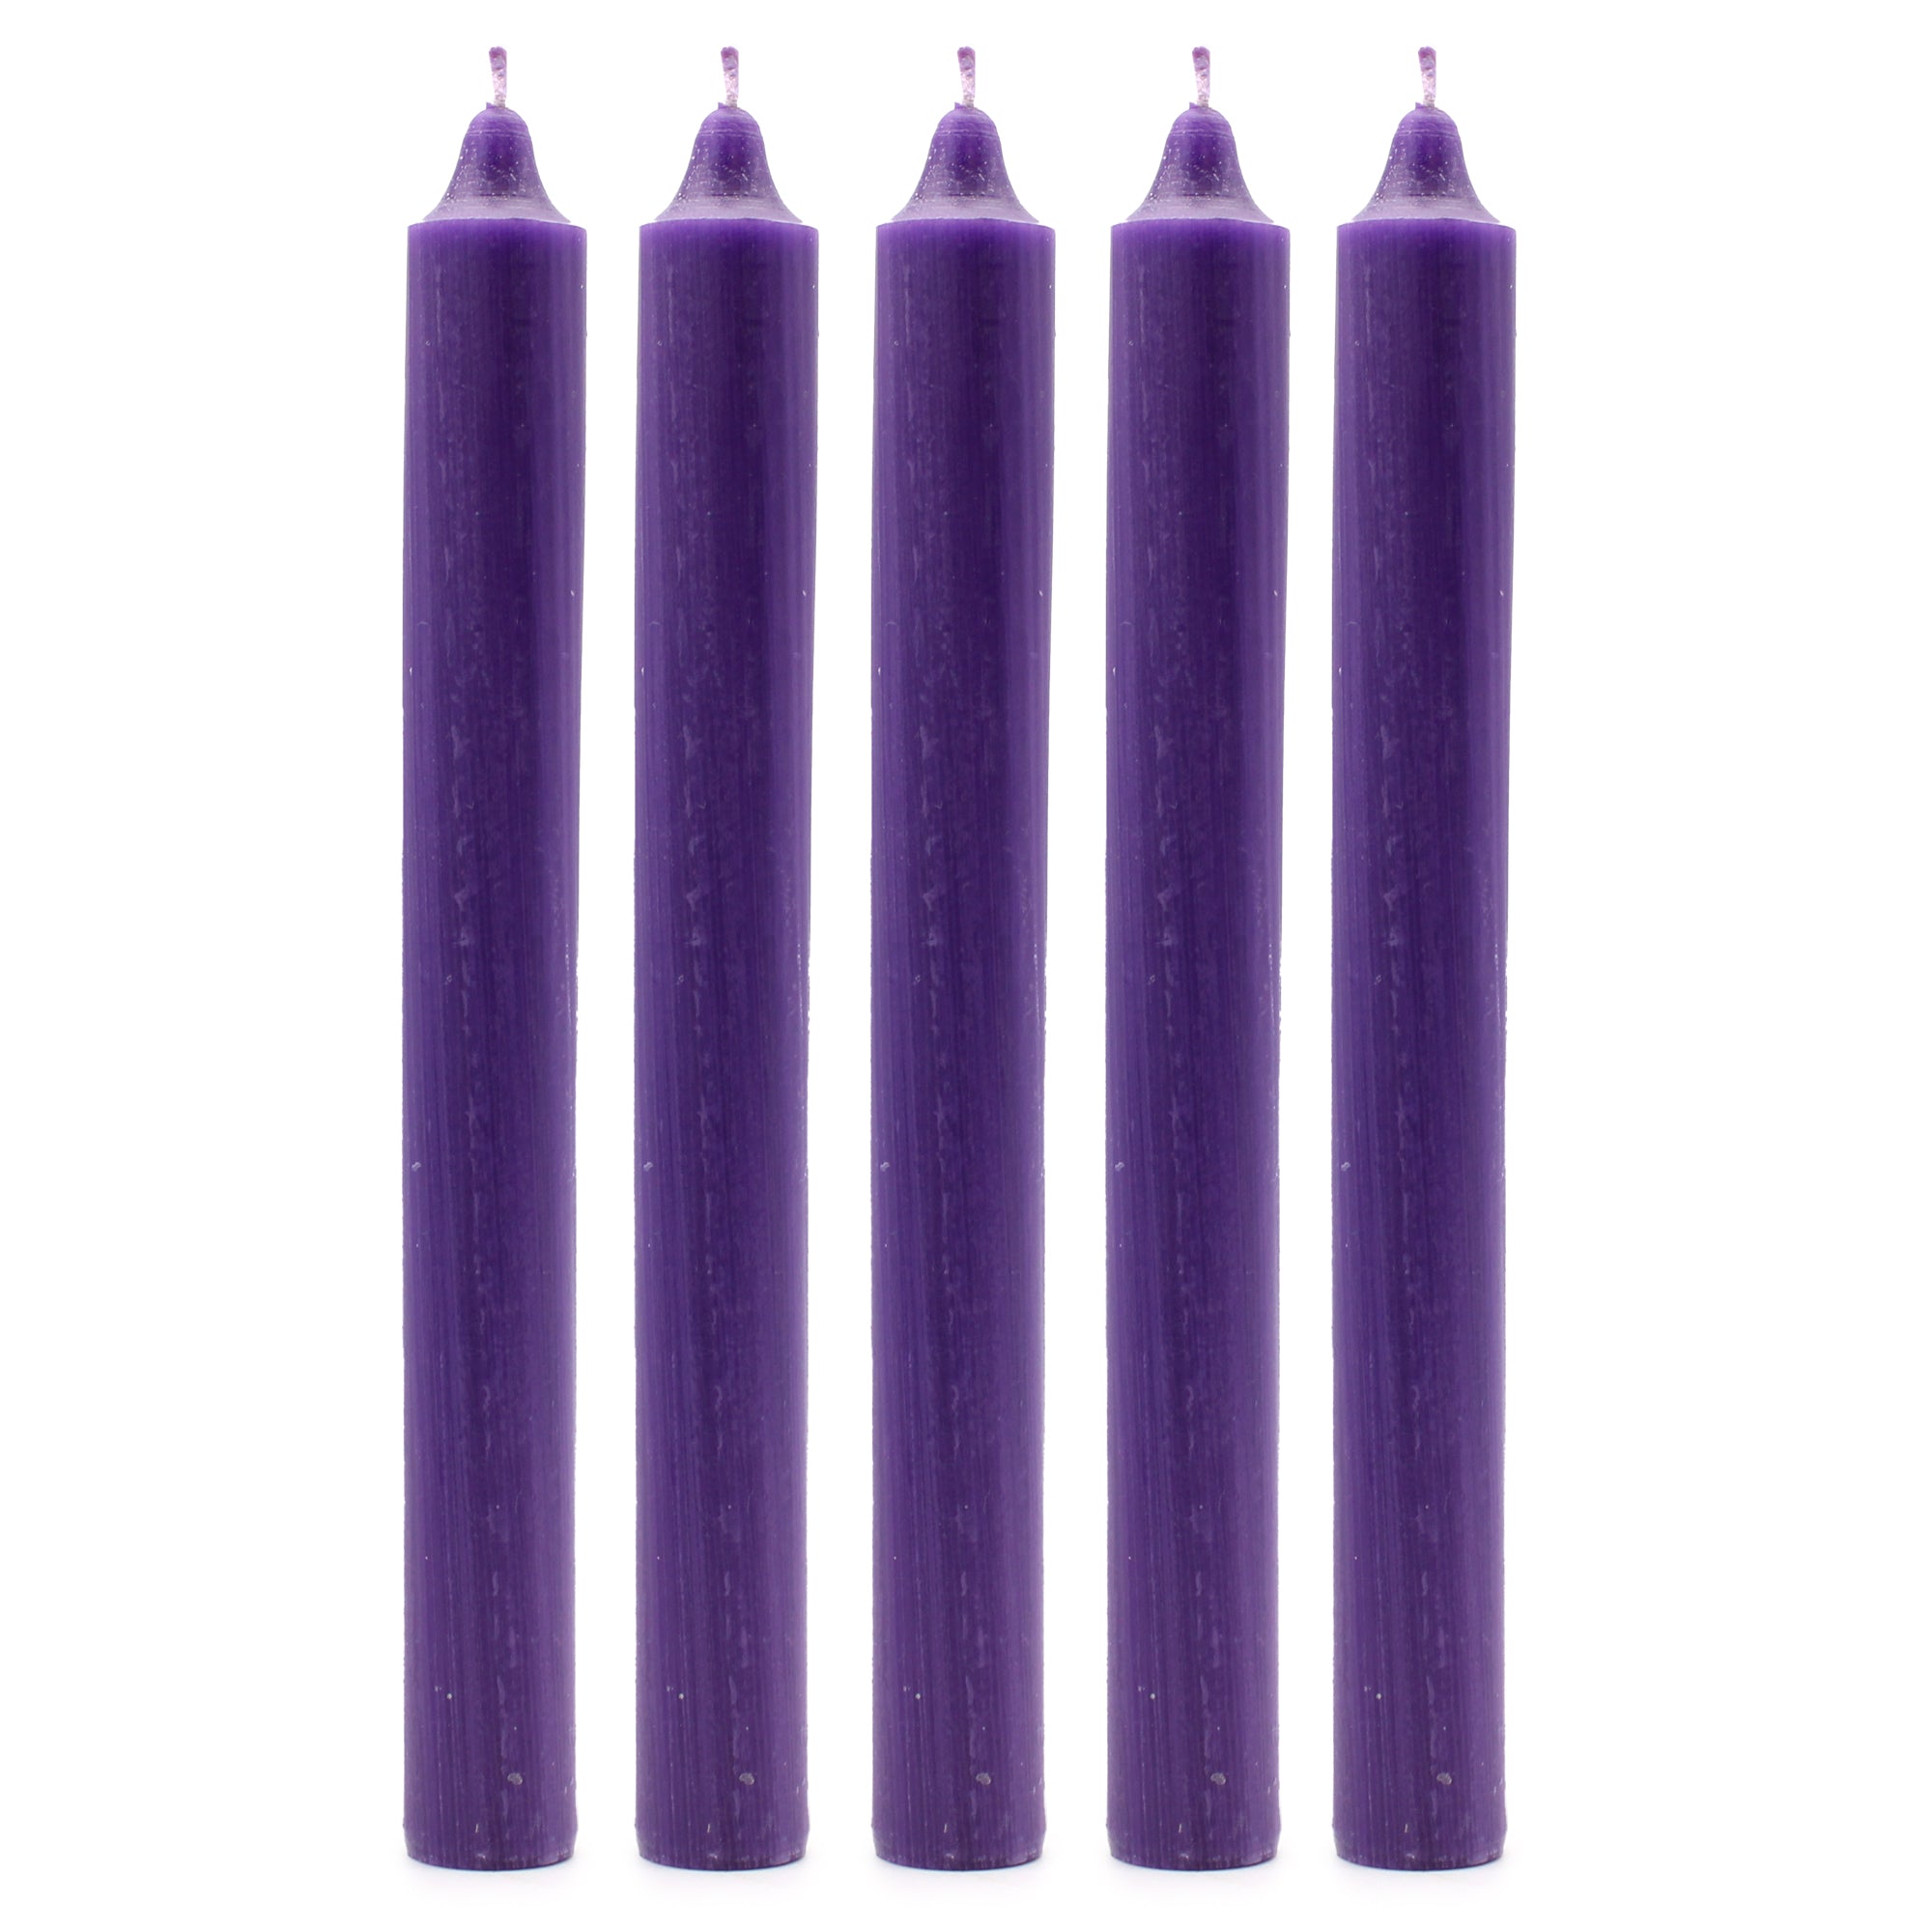 View Solid Colour Dinner Candles Rustic Purple Pack of 5 information